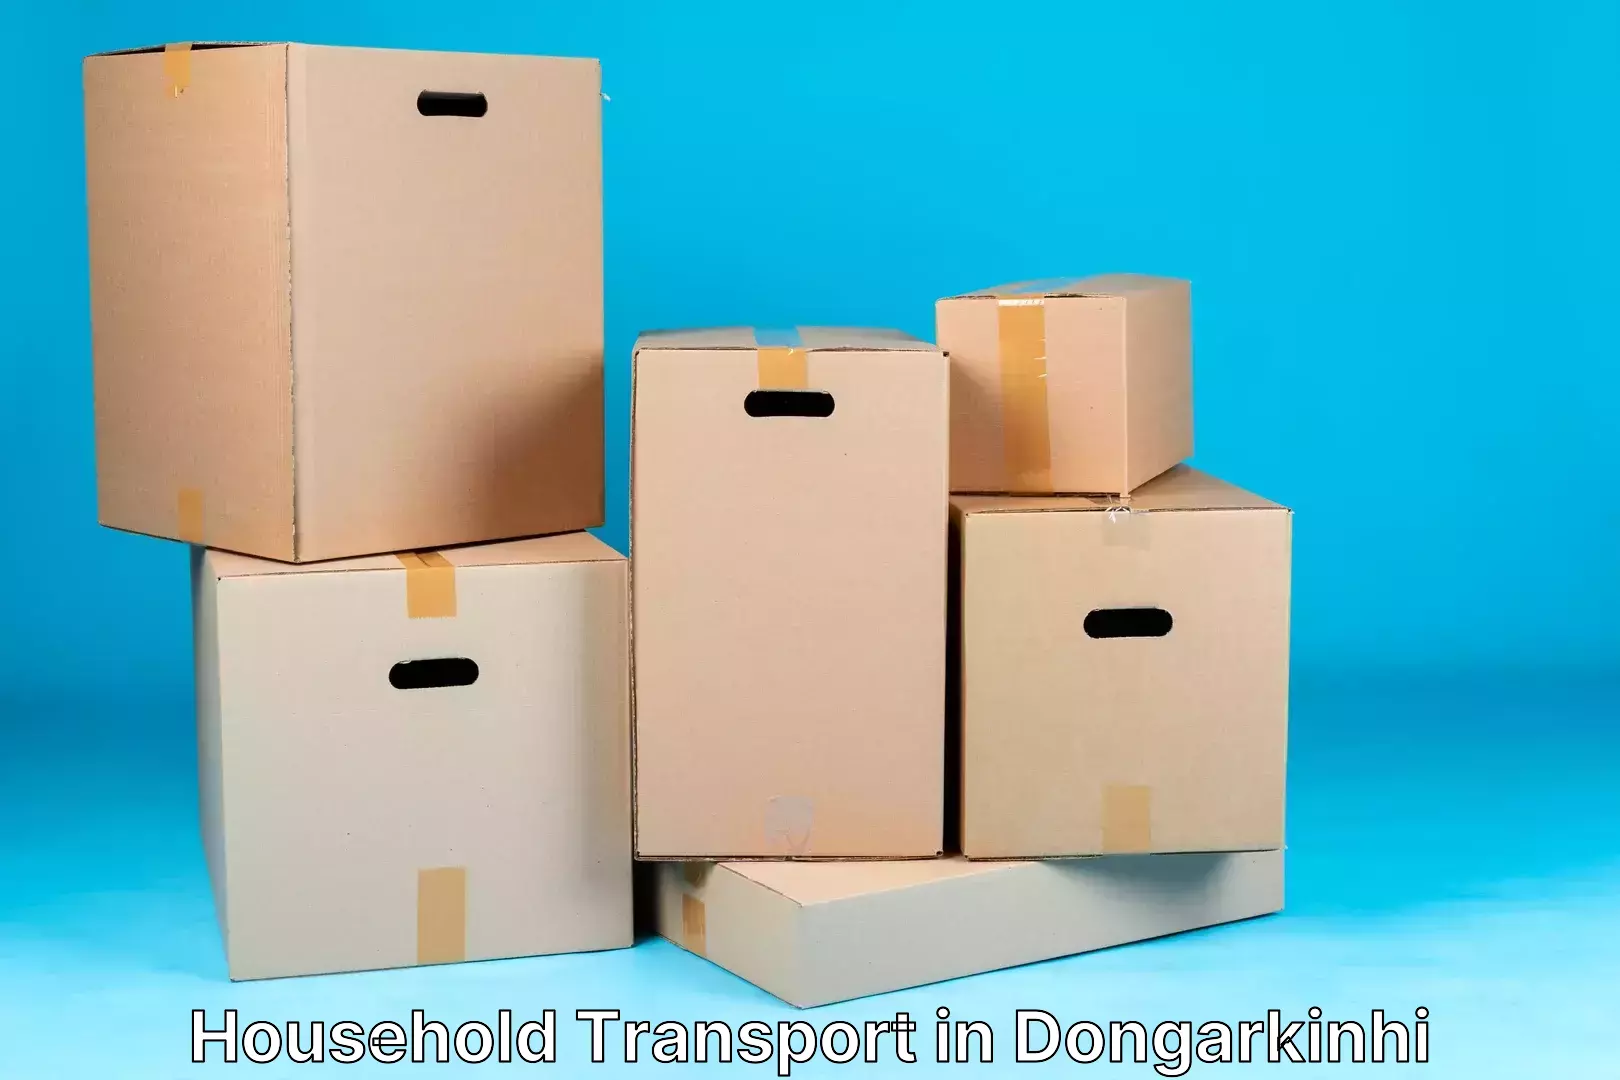 Affordable relocation solutions in Dongarkinhi